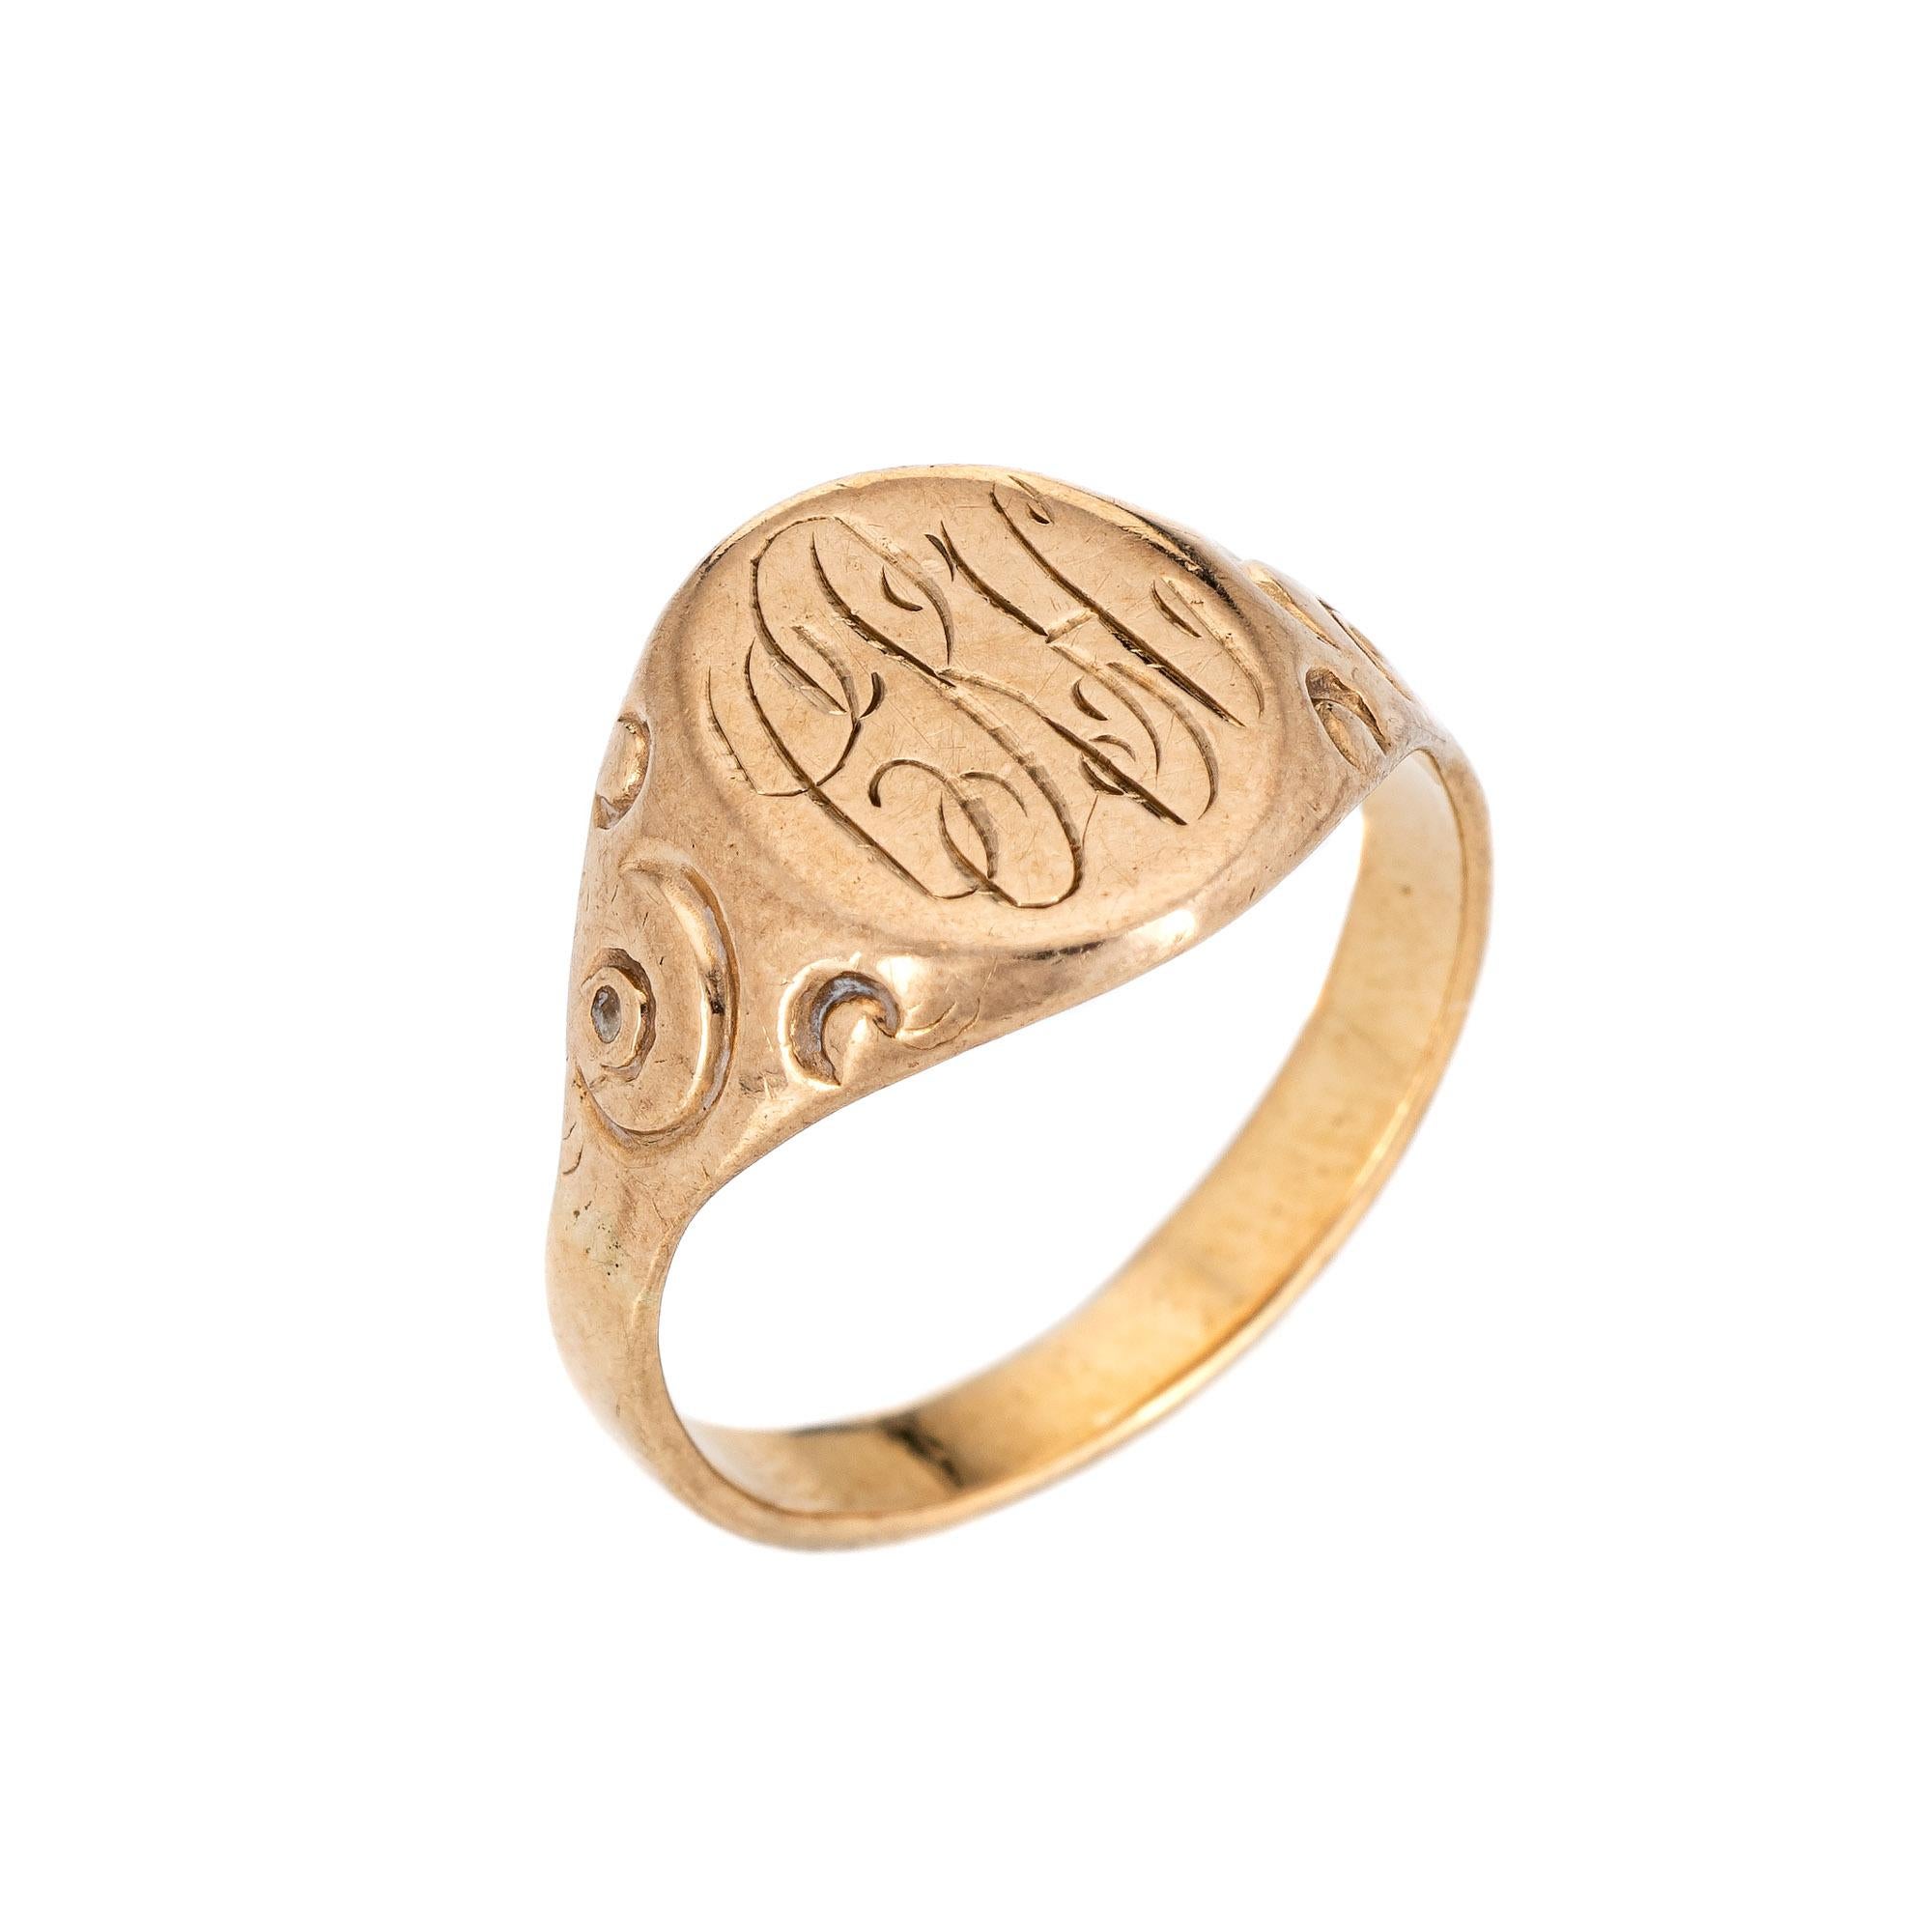 Lovely antique Victorian signet ring (circa 1880s to 1900s), crafted in 14 karat rose gold. 

The center oval is engraved with the initials 